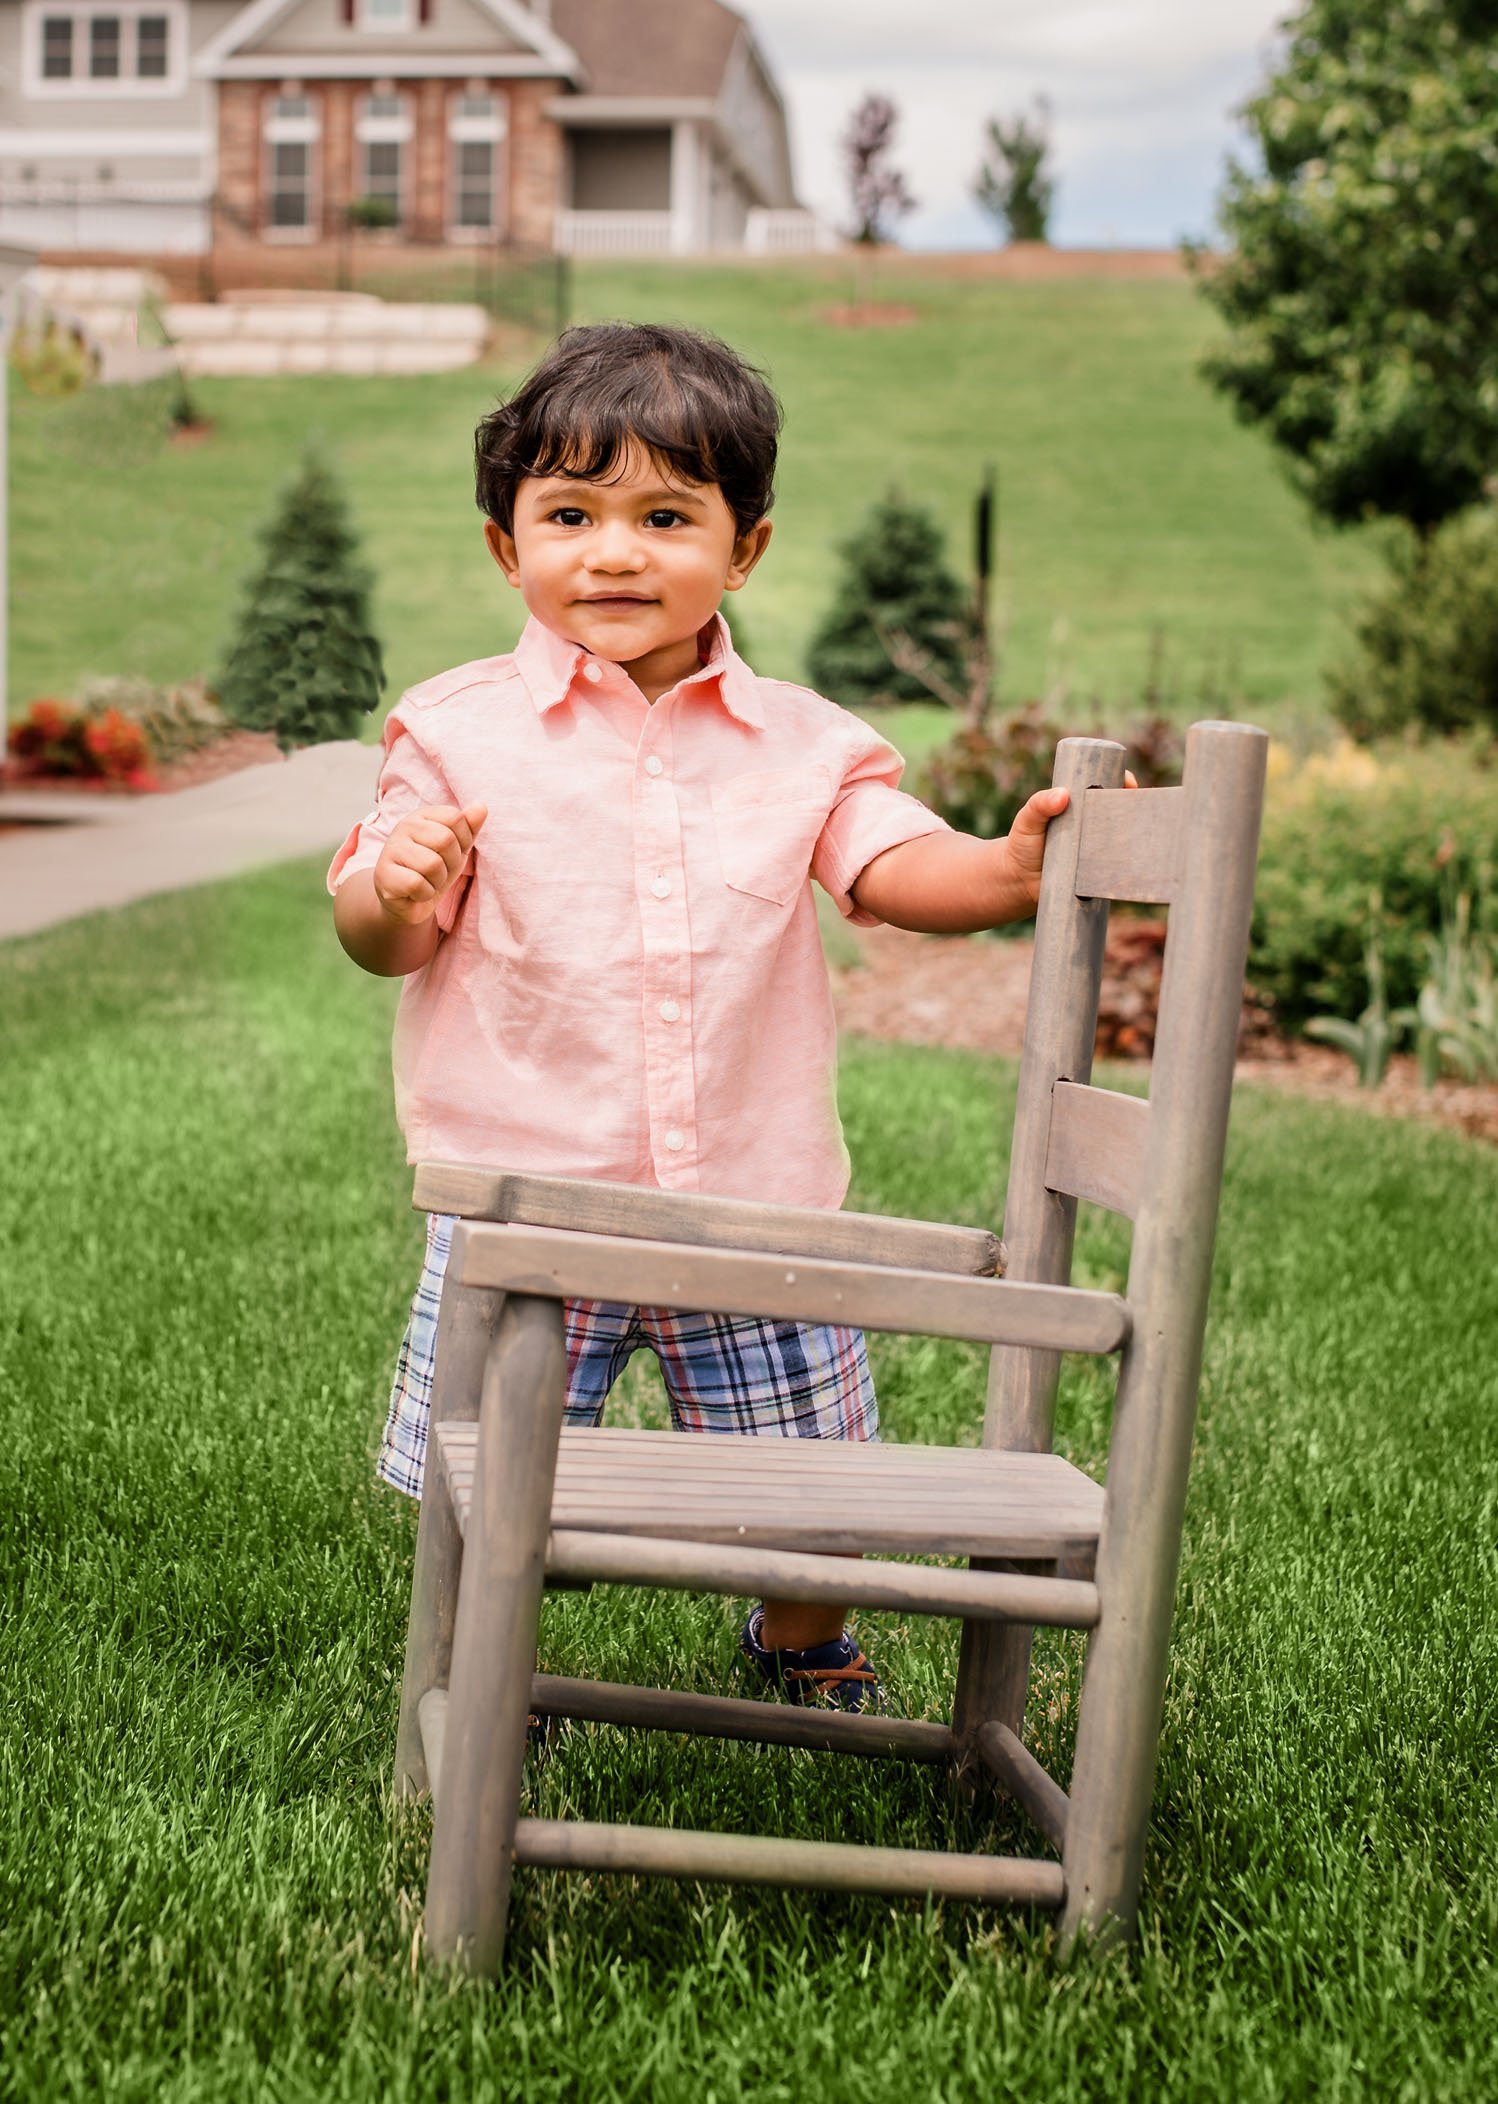 8 mo old boy standing by chair in garden